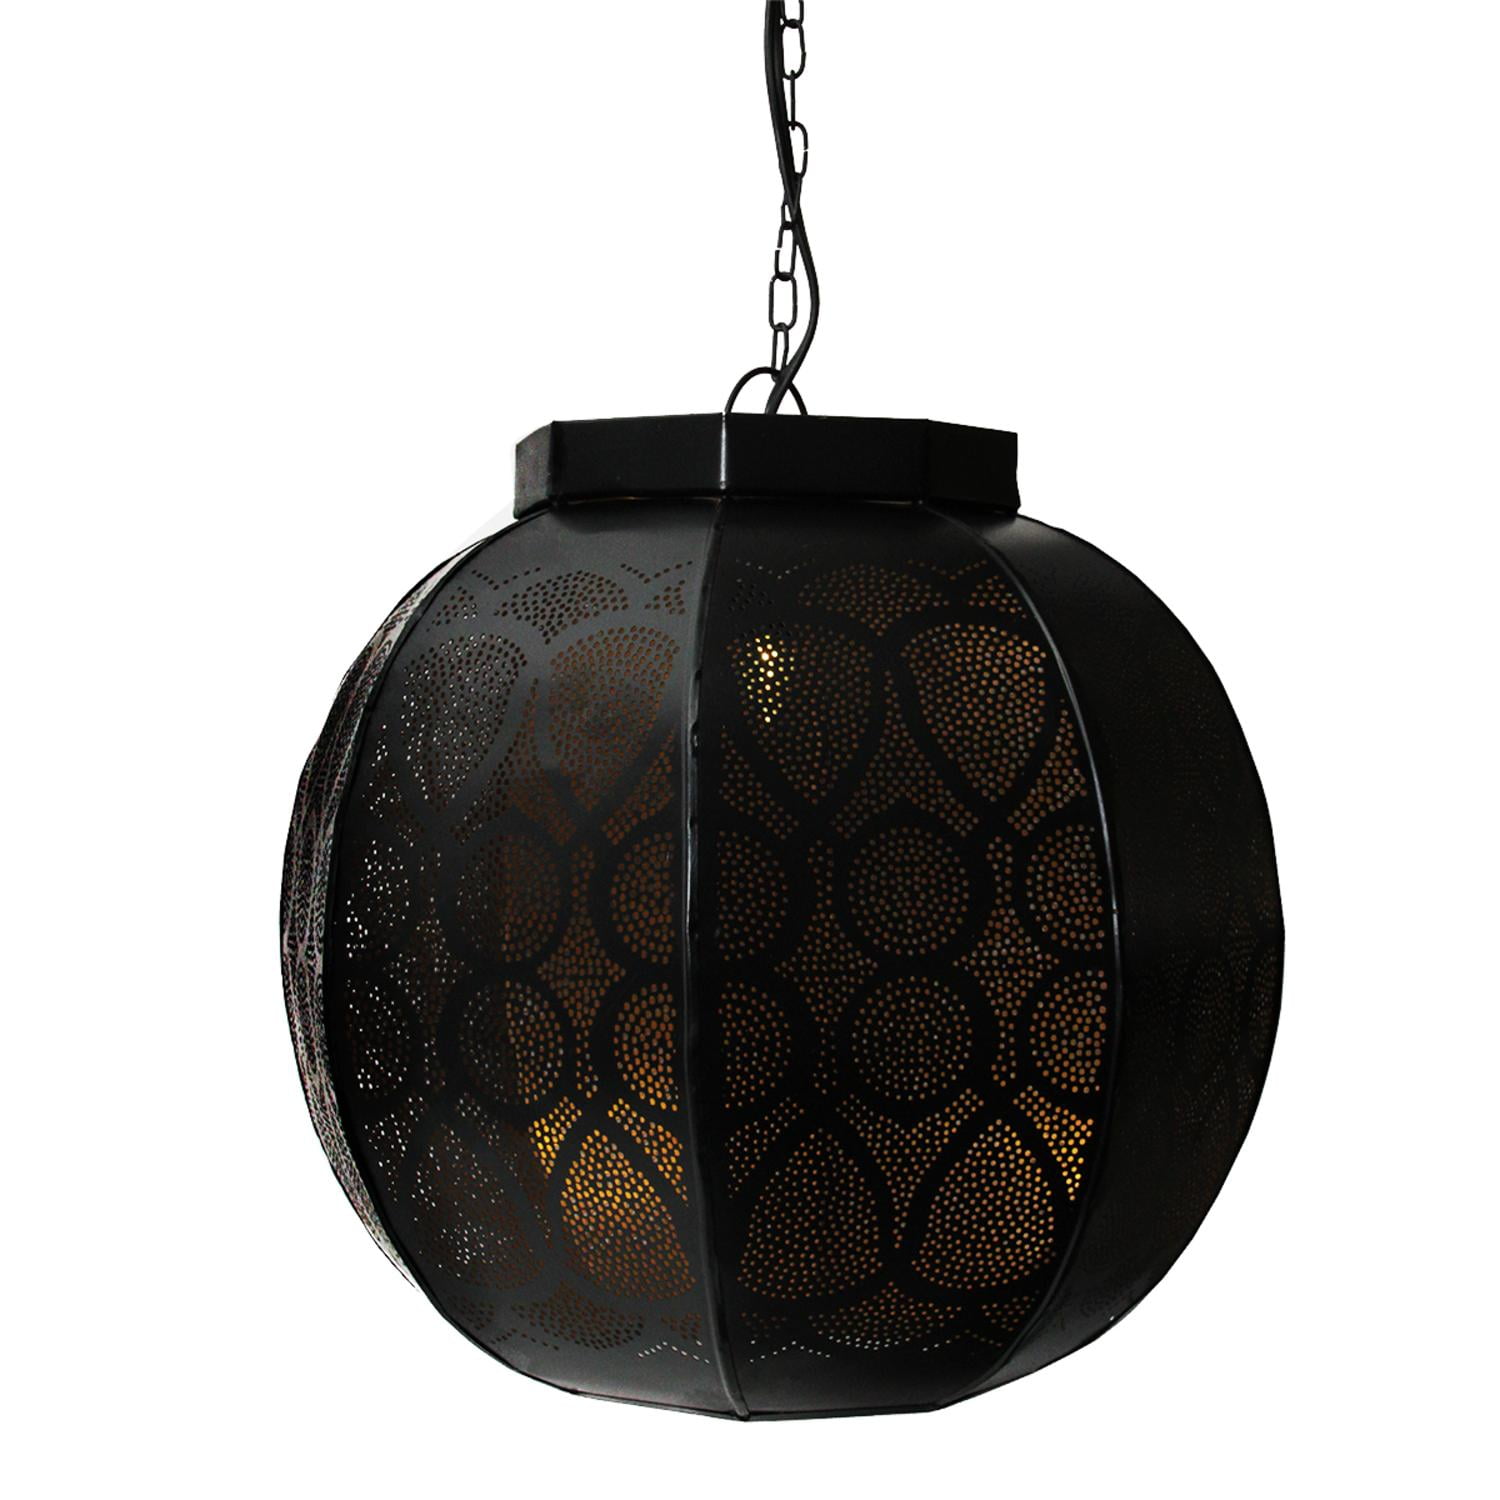 Gold Cut Out Ceiling Pendant Light Lamp Shade New Moroccan Style Black 